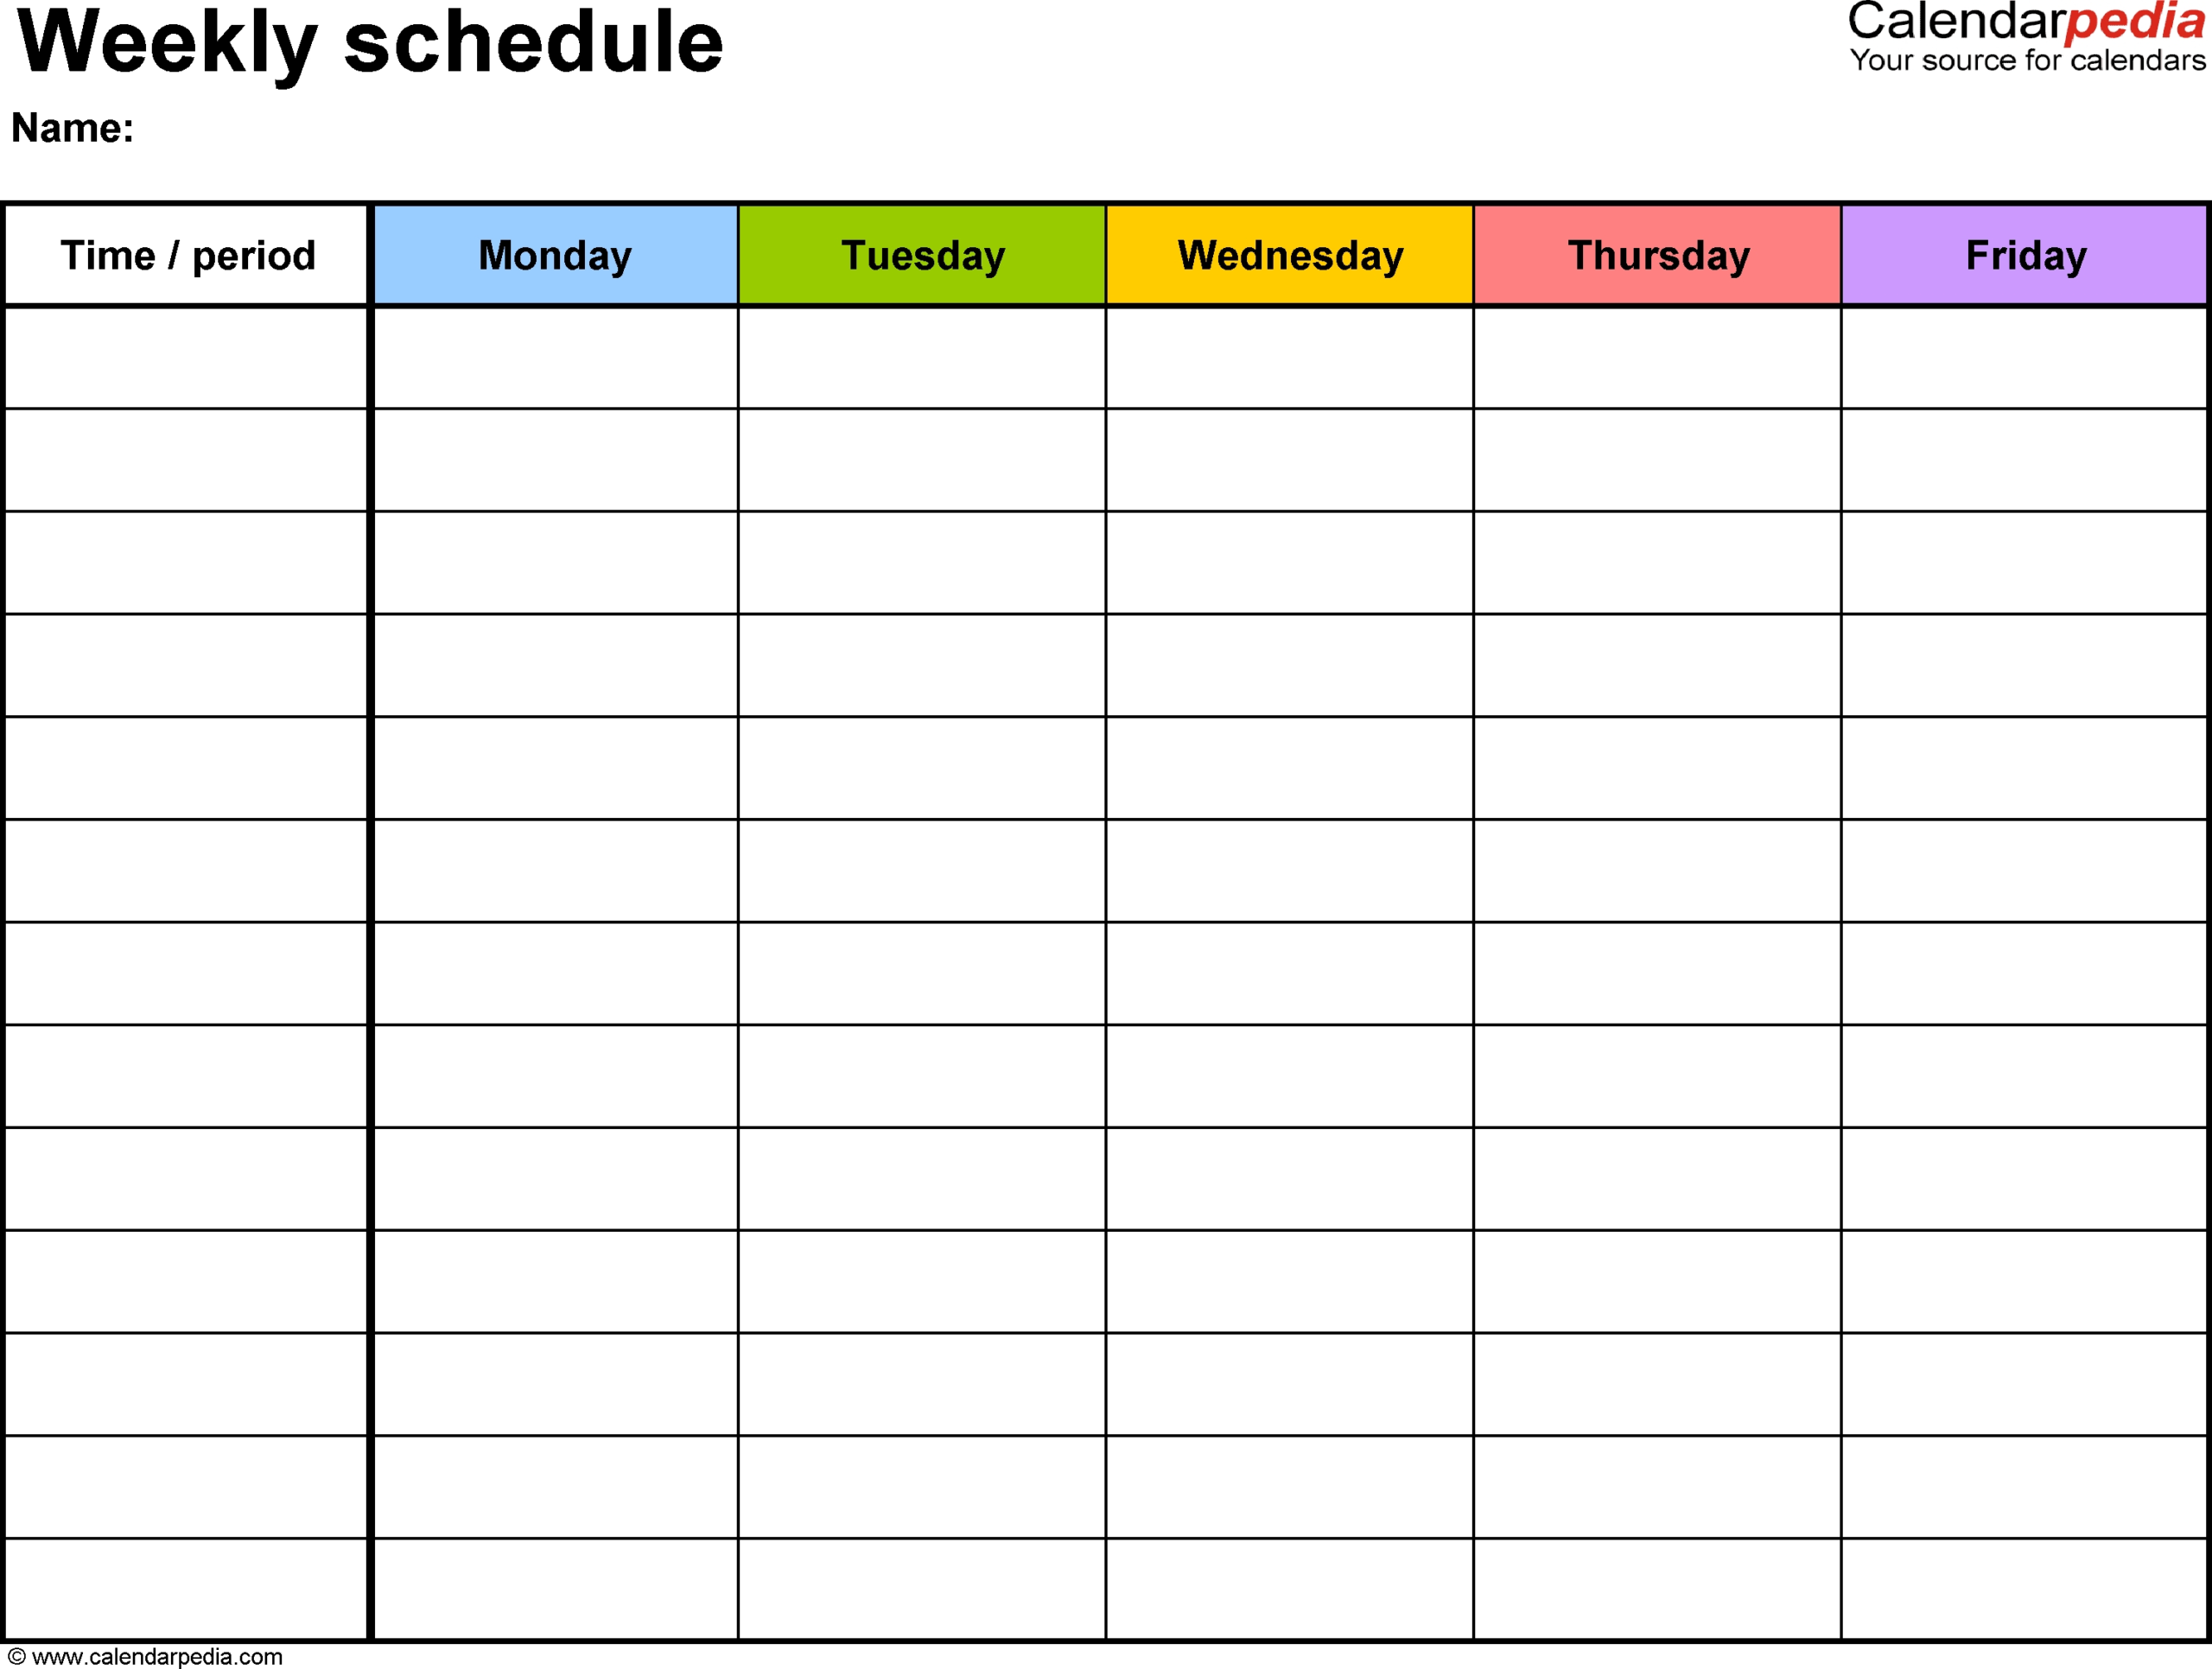 Printable Appointment Calendars Monday Through Friday Calendar for Blank Calendar Printable Monday To Friday